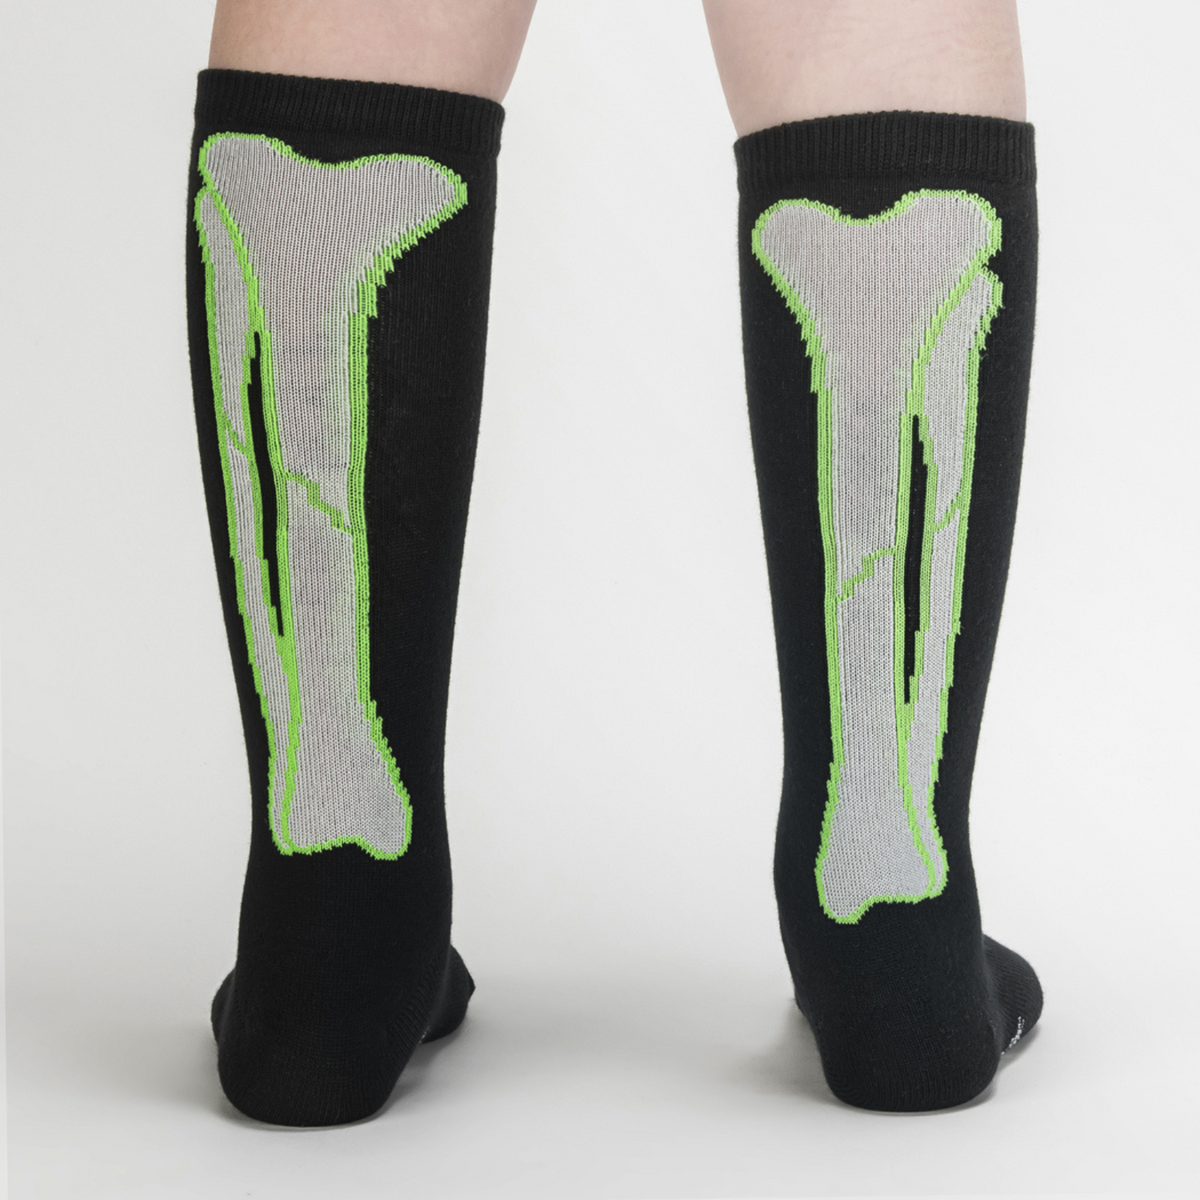 Sock It To Me It&#39;s Going Tibia Good Day kids&#39; sock (GLOW IN THE DARK!) featuring a black knee high sock with outline of tibia bones worn by model from back